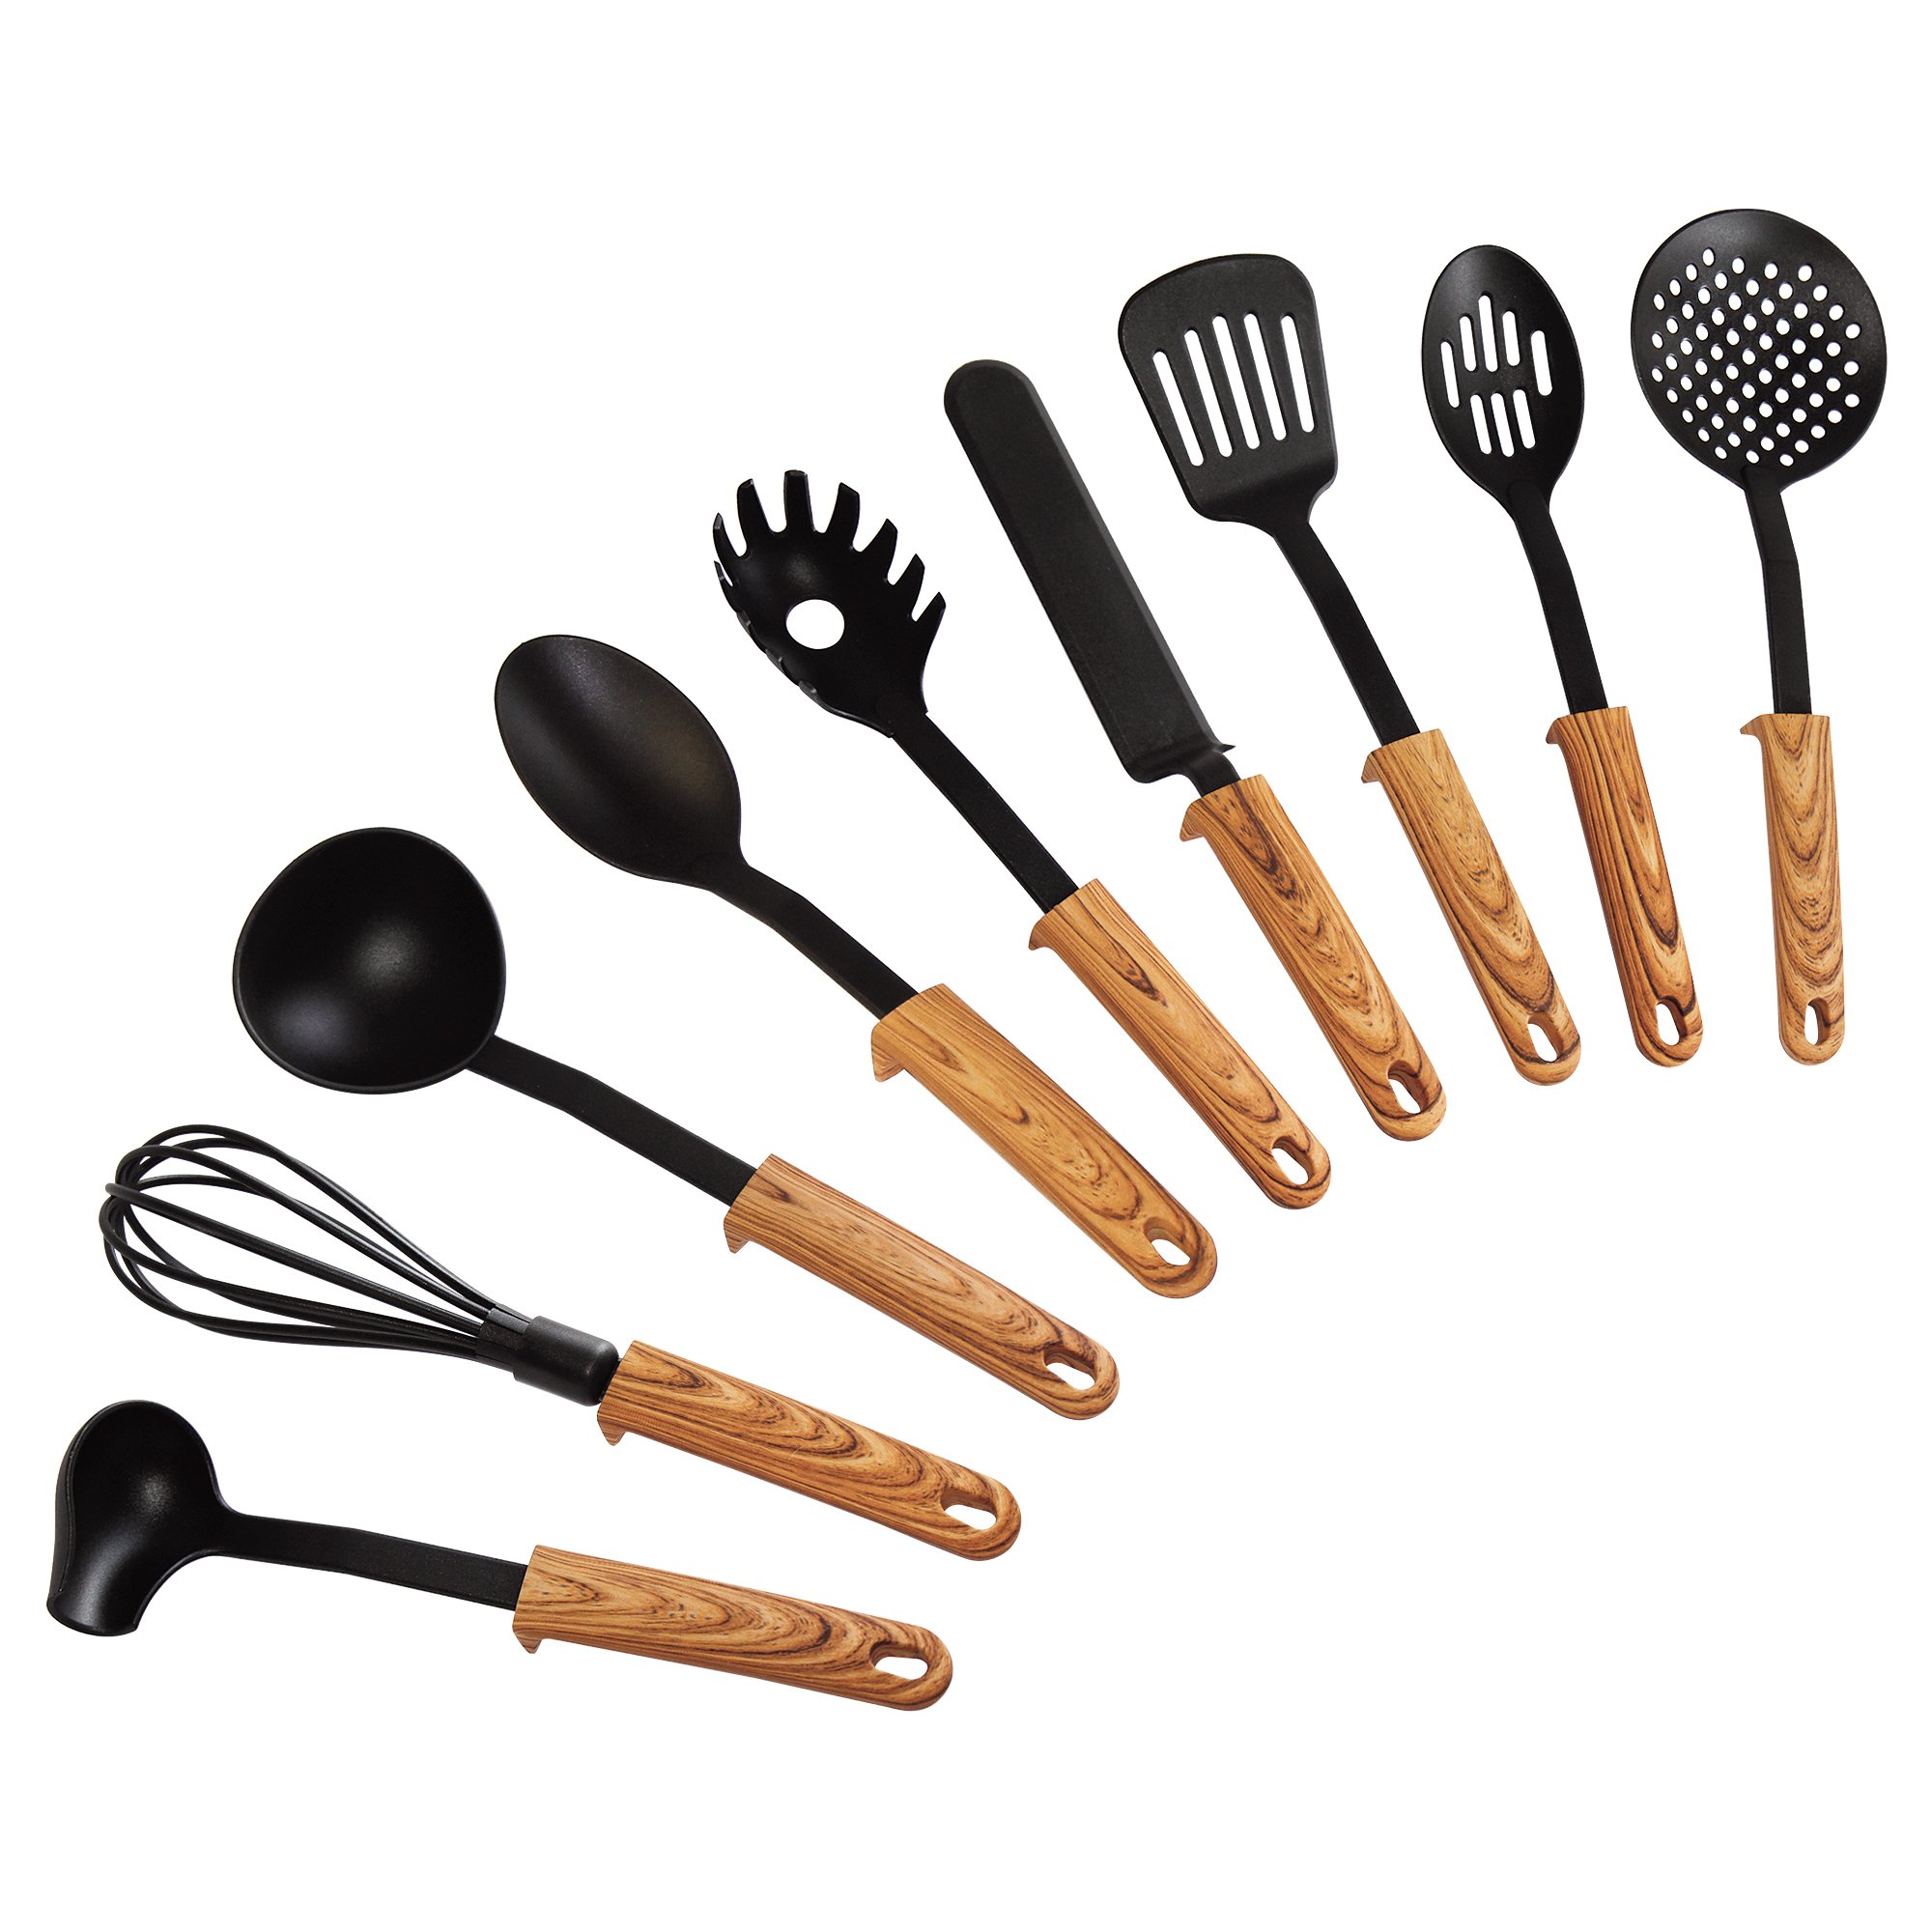 STONELINE® Back to Nature 9-piece Kitchen Aid Set, with practical support, for non-stick cookware